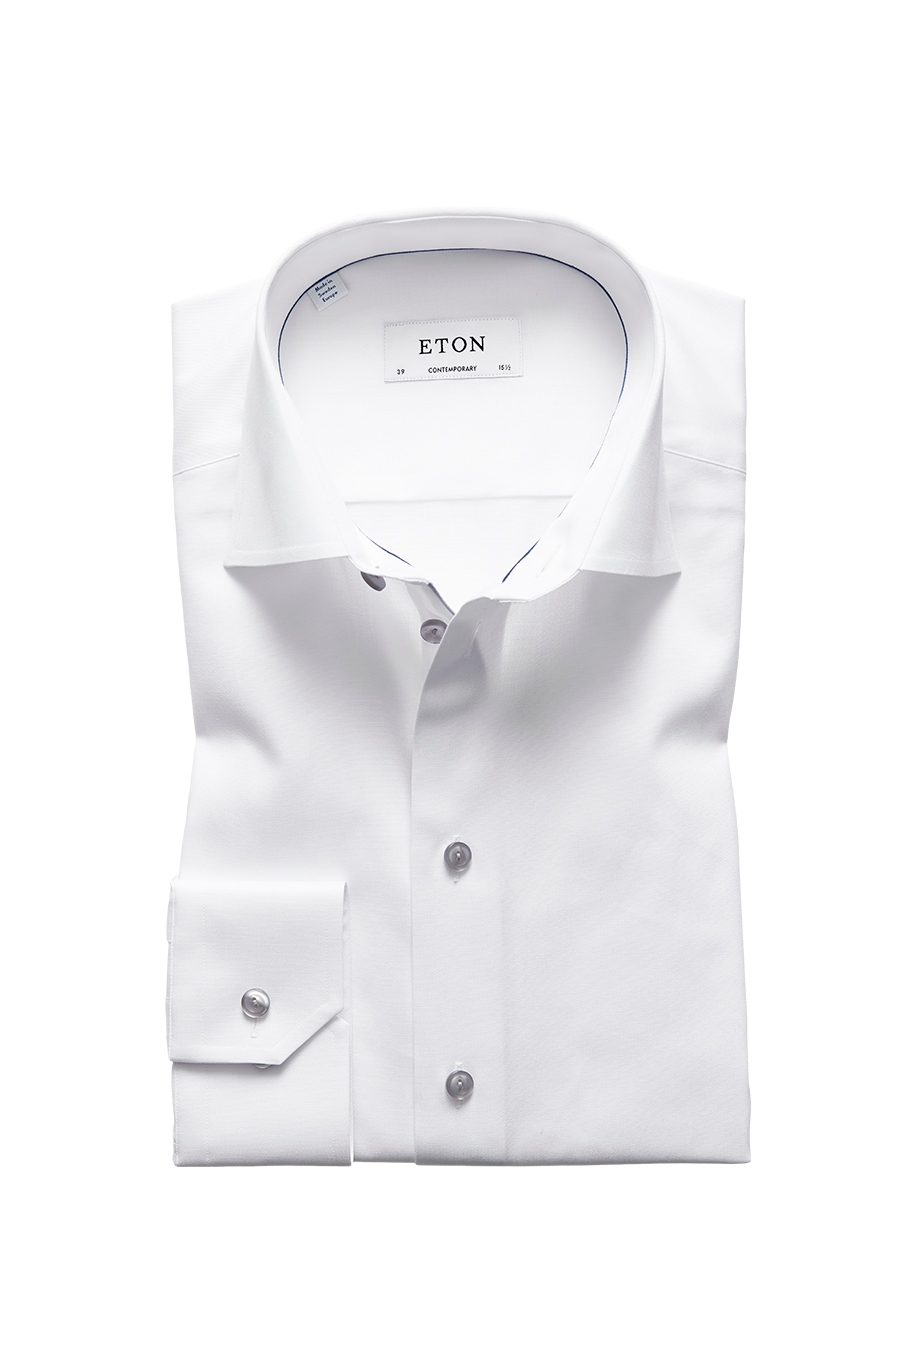 Eton White twill shirt with grey details - contemporary fit - Harvey ...